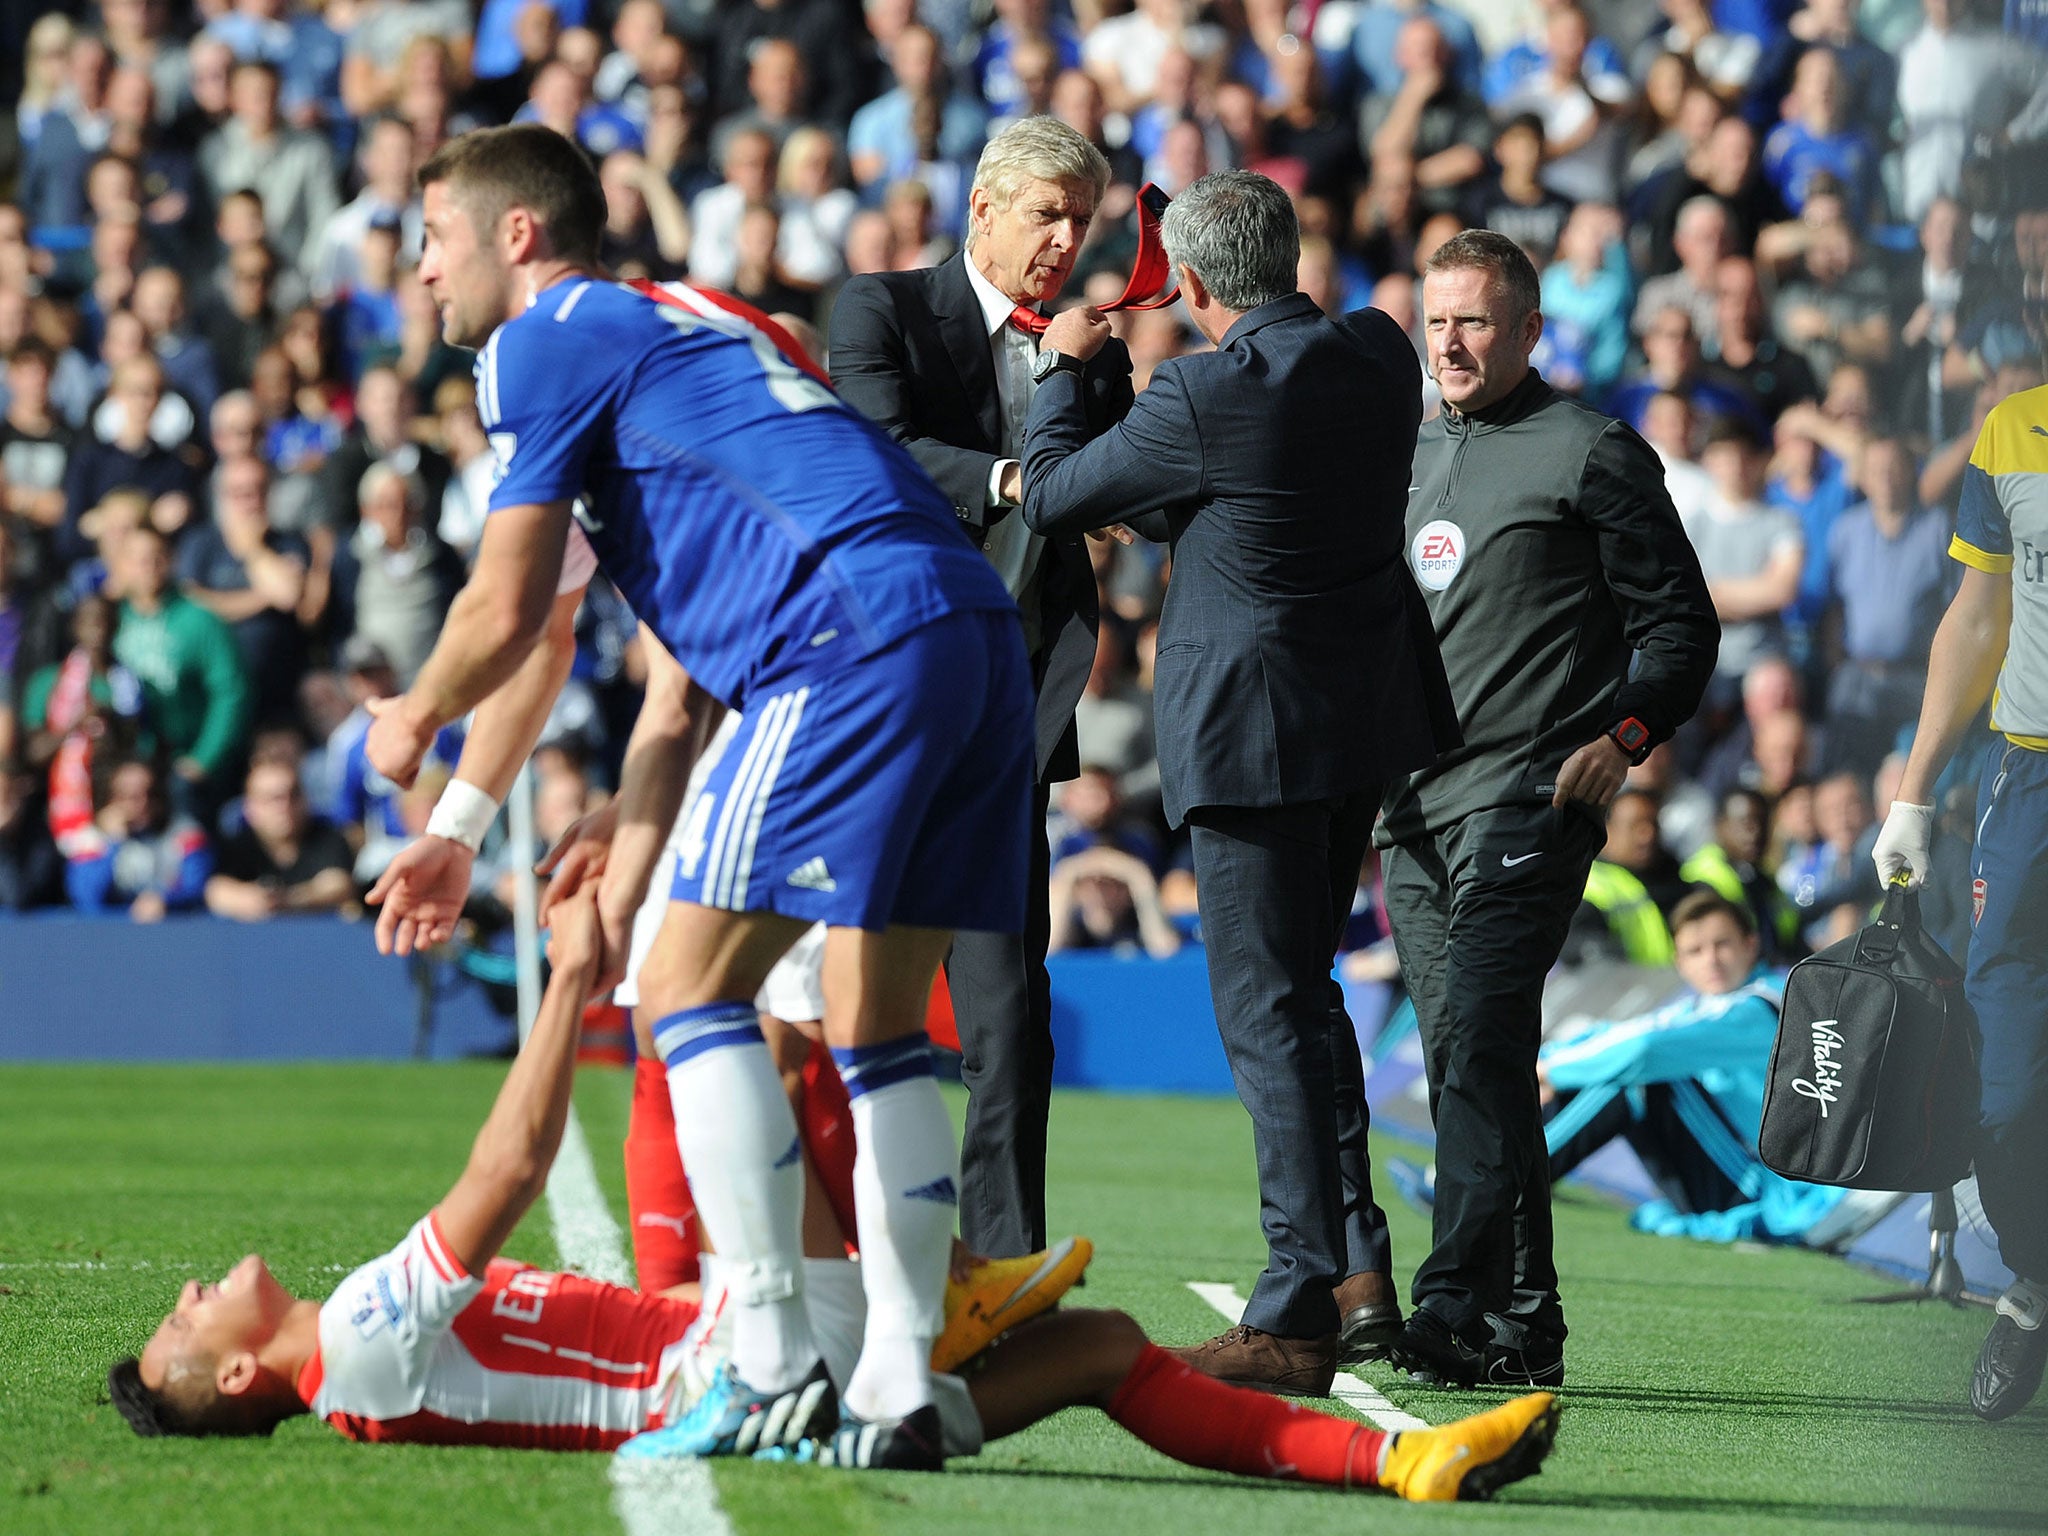 Arsene Wenger and Jose Mourinho clash after Gary Cahill's tackle on Alexis Sanchez